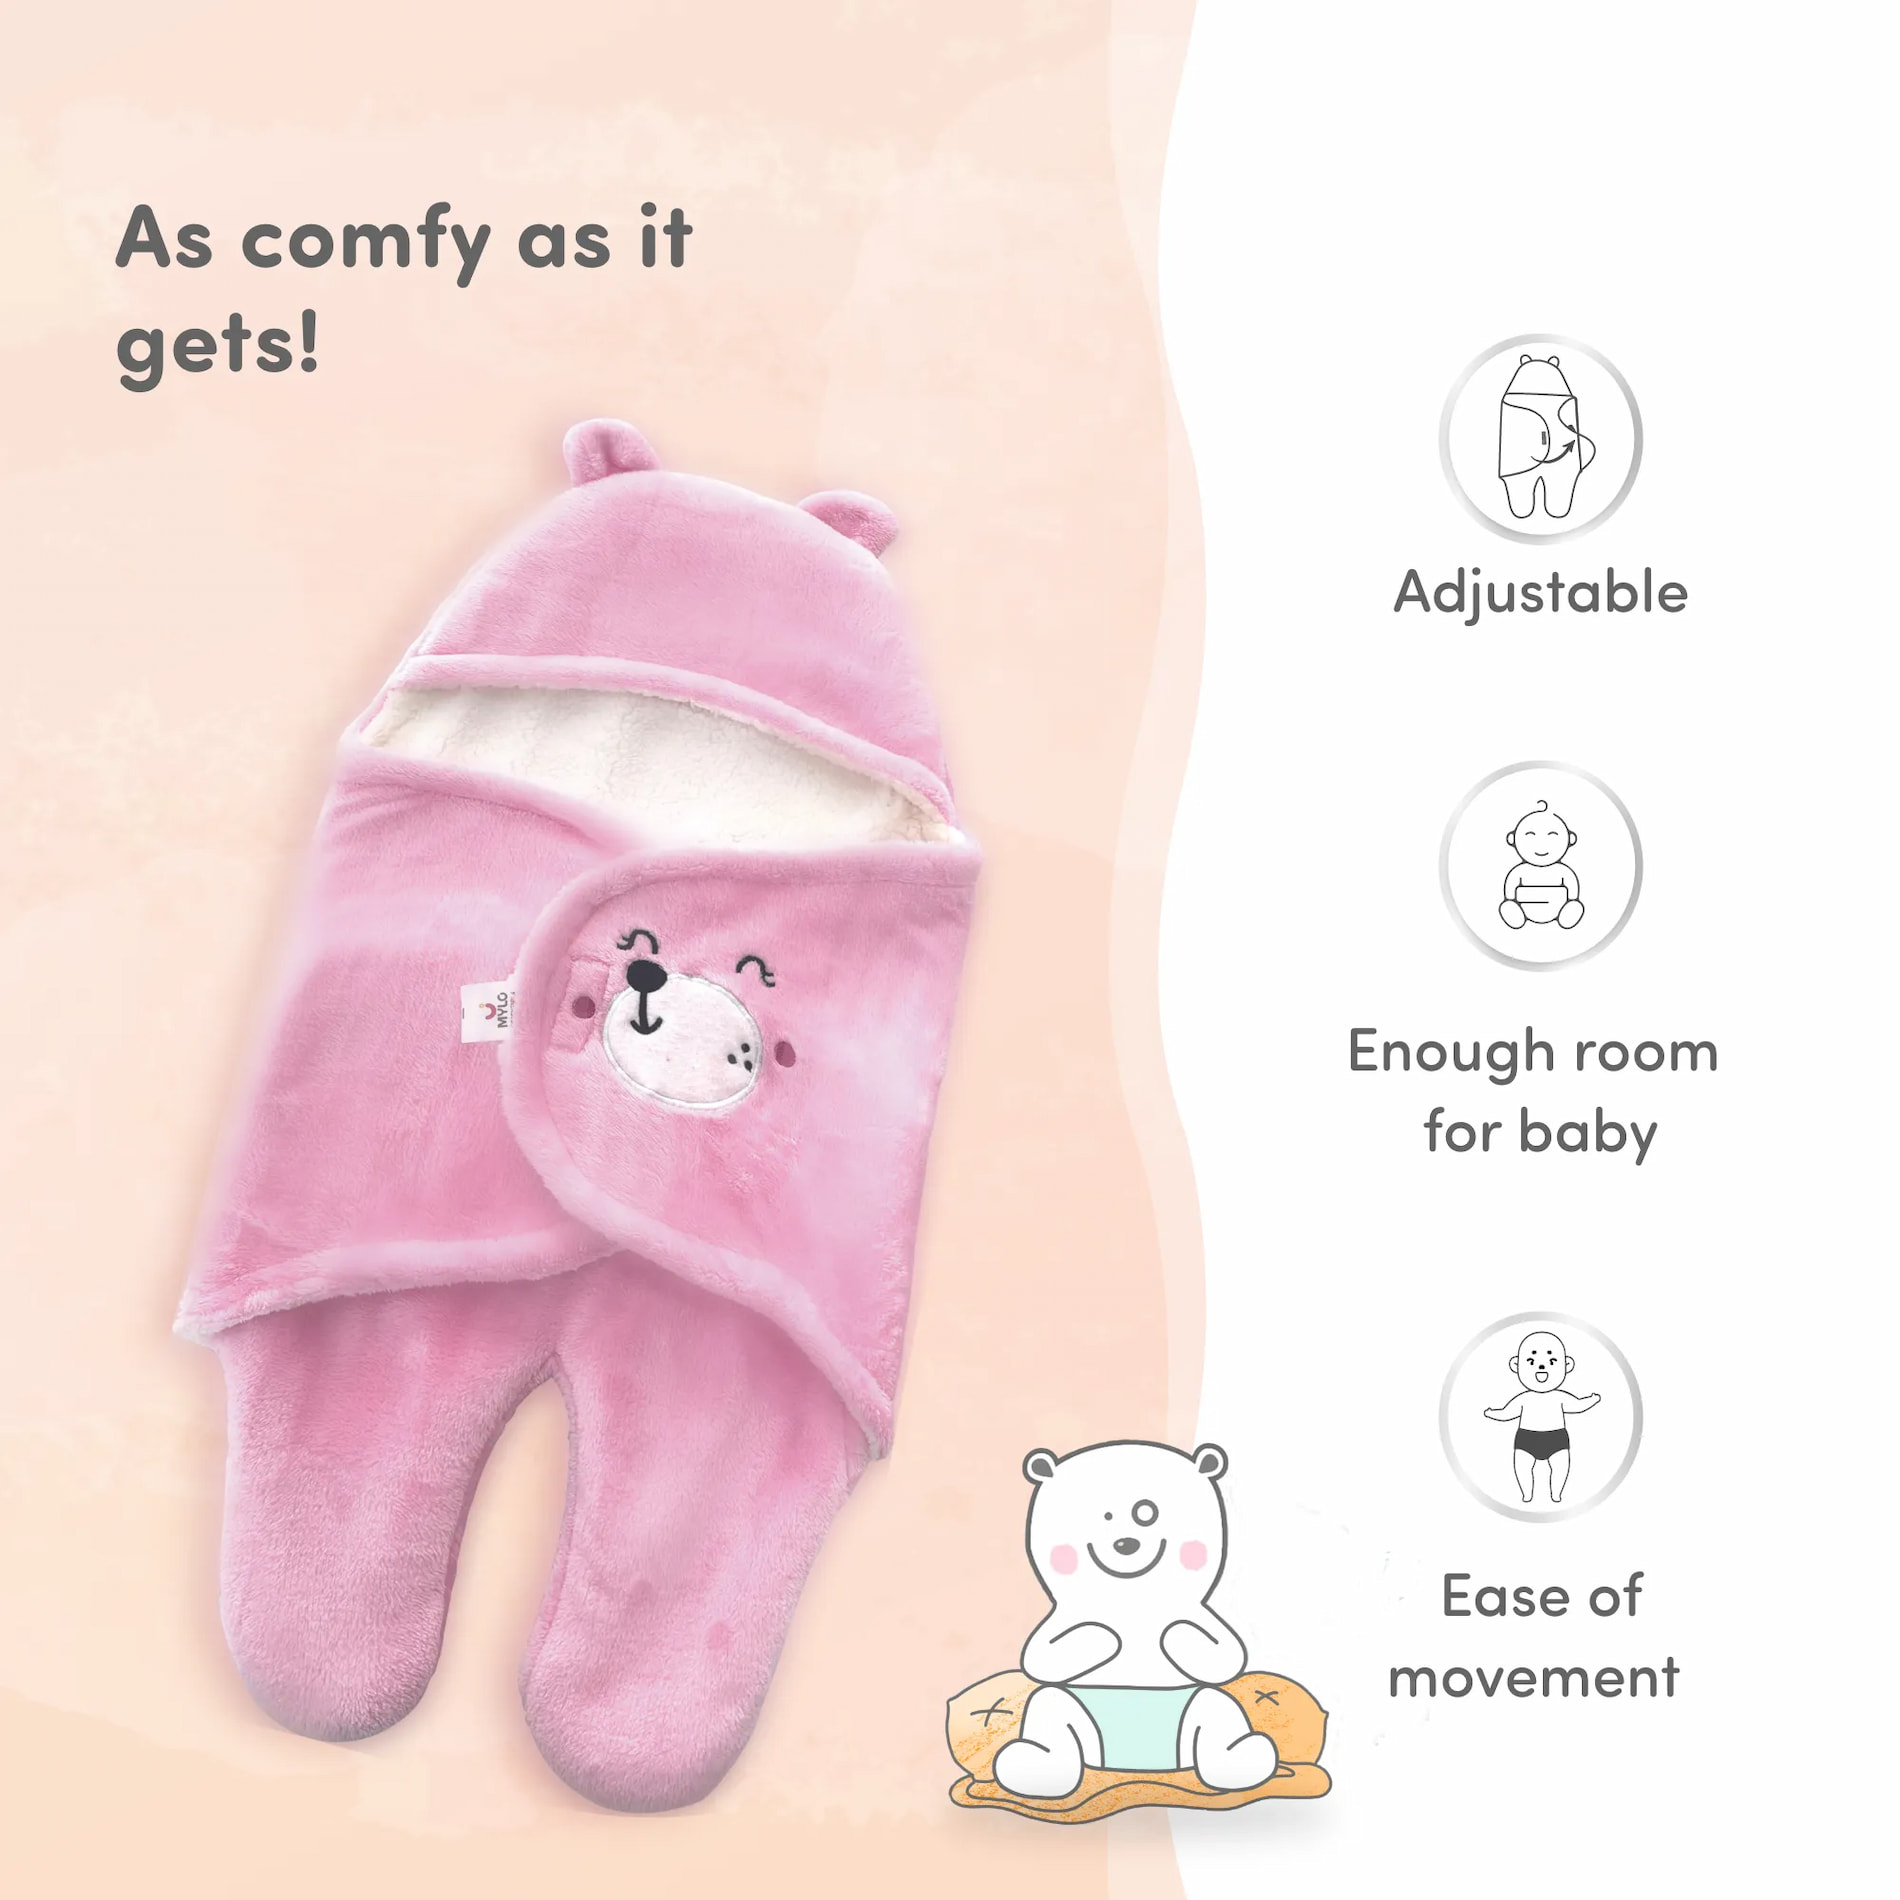 Baby Wrapper for New Born | Baby Swaddling Wrapper | 4-in-1 All Season AC Blanket cum Sleeping Bag for Baby 0-6 Months - Light Brown